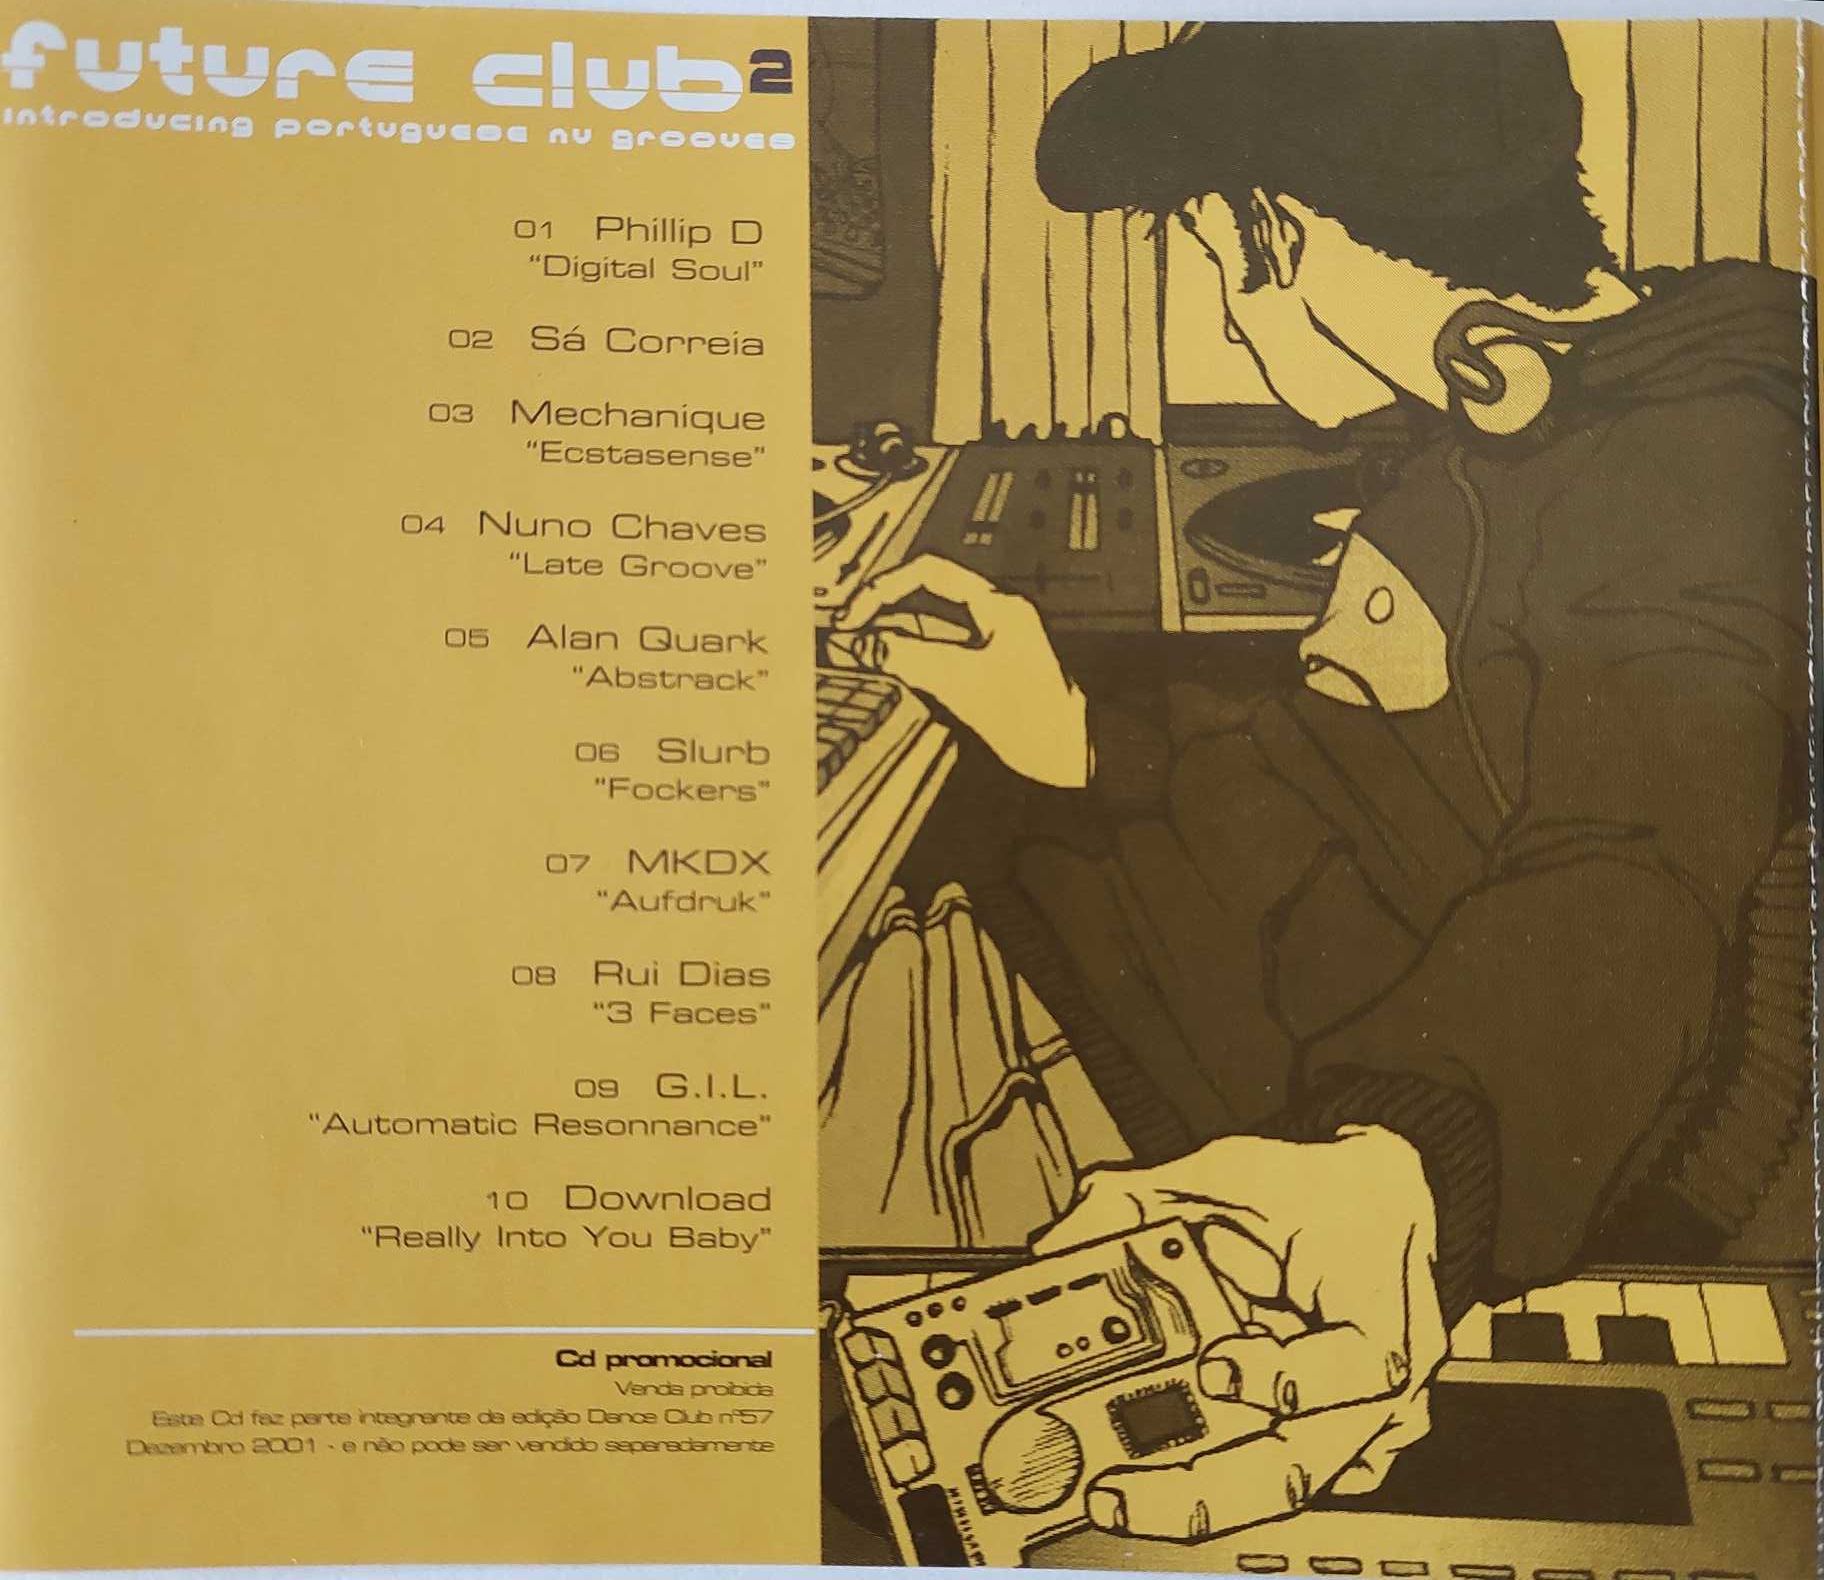 Future Club - Introducing portuguese Nu Grooves (CD)